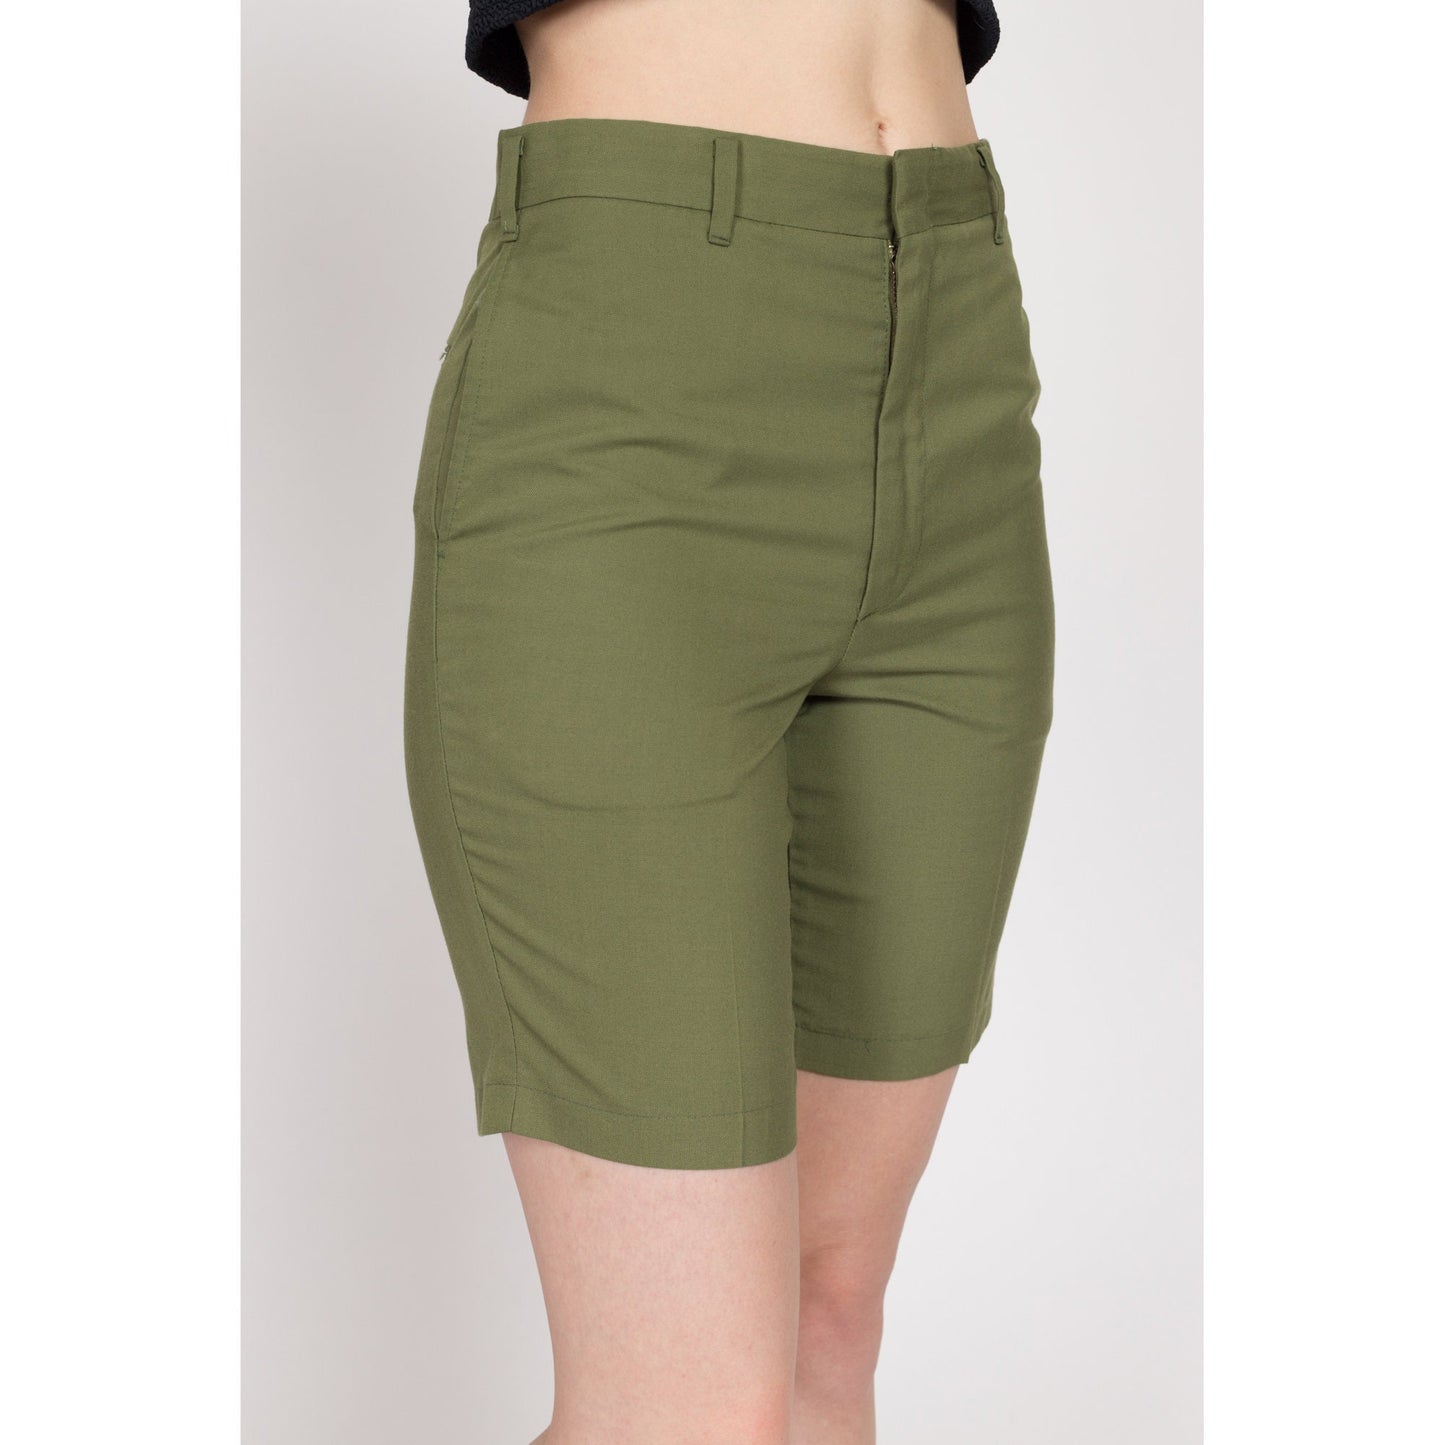 XS 70s Army Green Shorts | Vintage High Waisted Retro Trouser Shorts